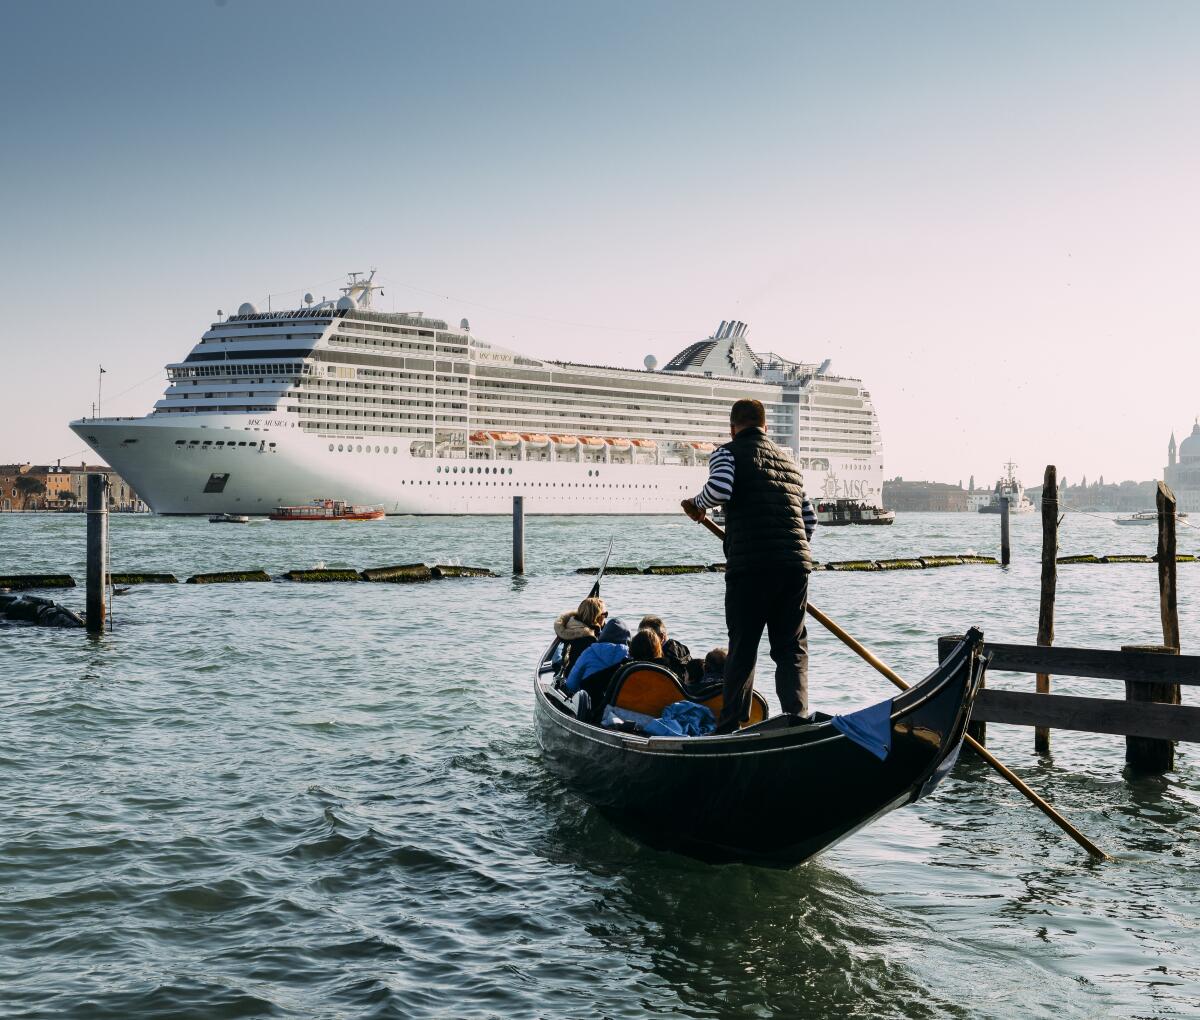 A gondolier in Venice, Italy, looks at a large cruise ship in Giudecca Canal.